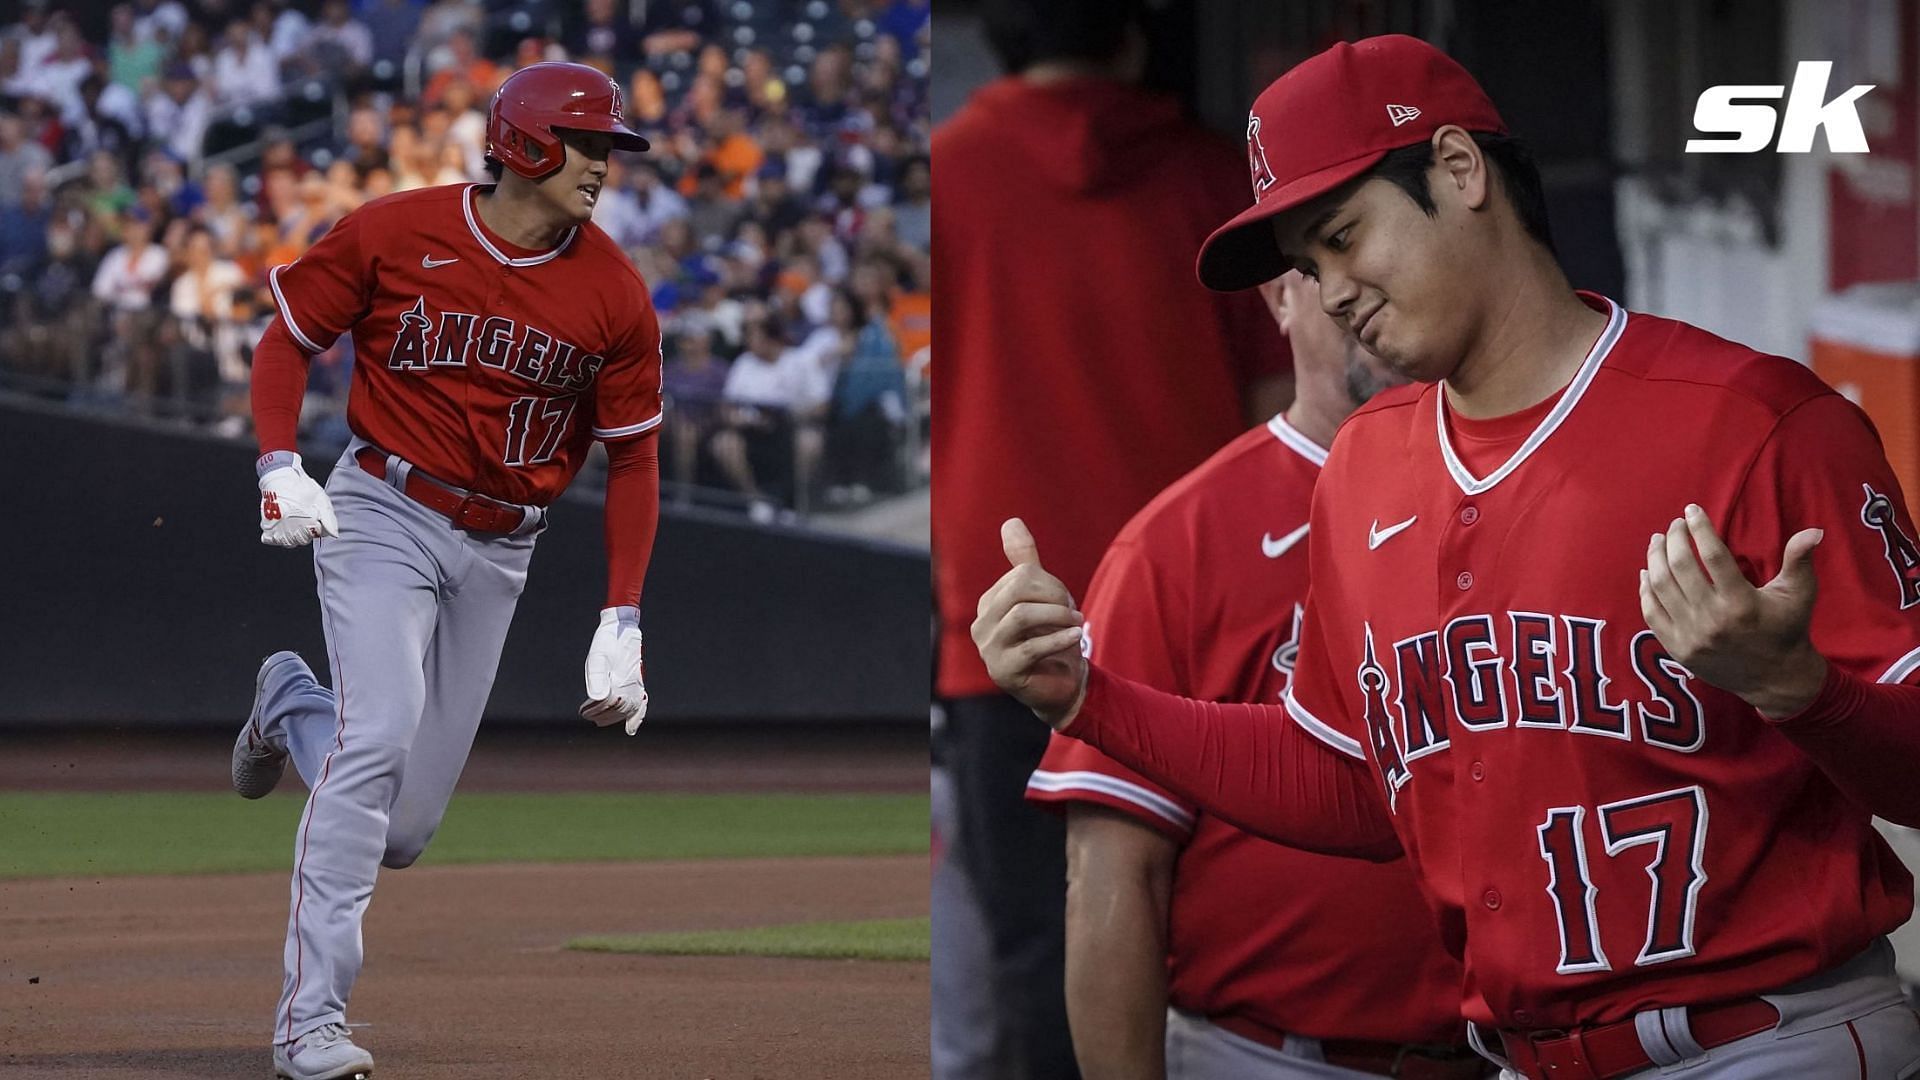 Google Bard believes that Shohei Ohtani will enjoy an incredibly successful tenure with the Los Angeles Dodgers